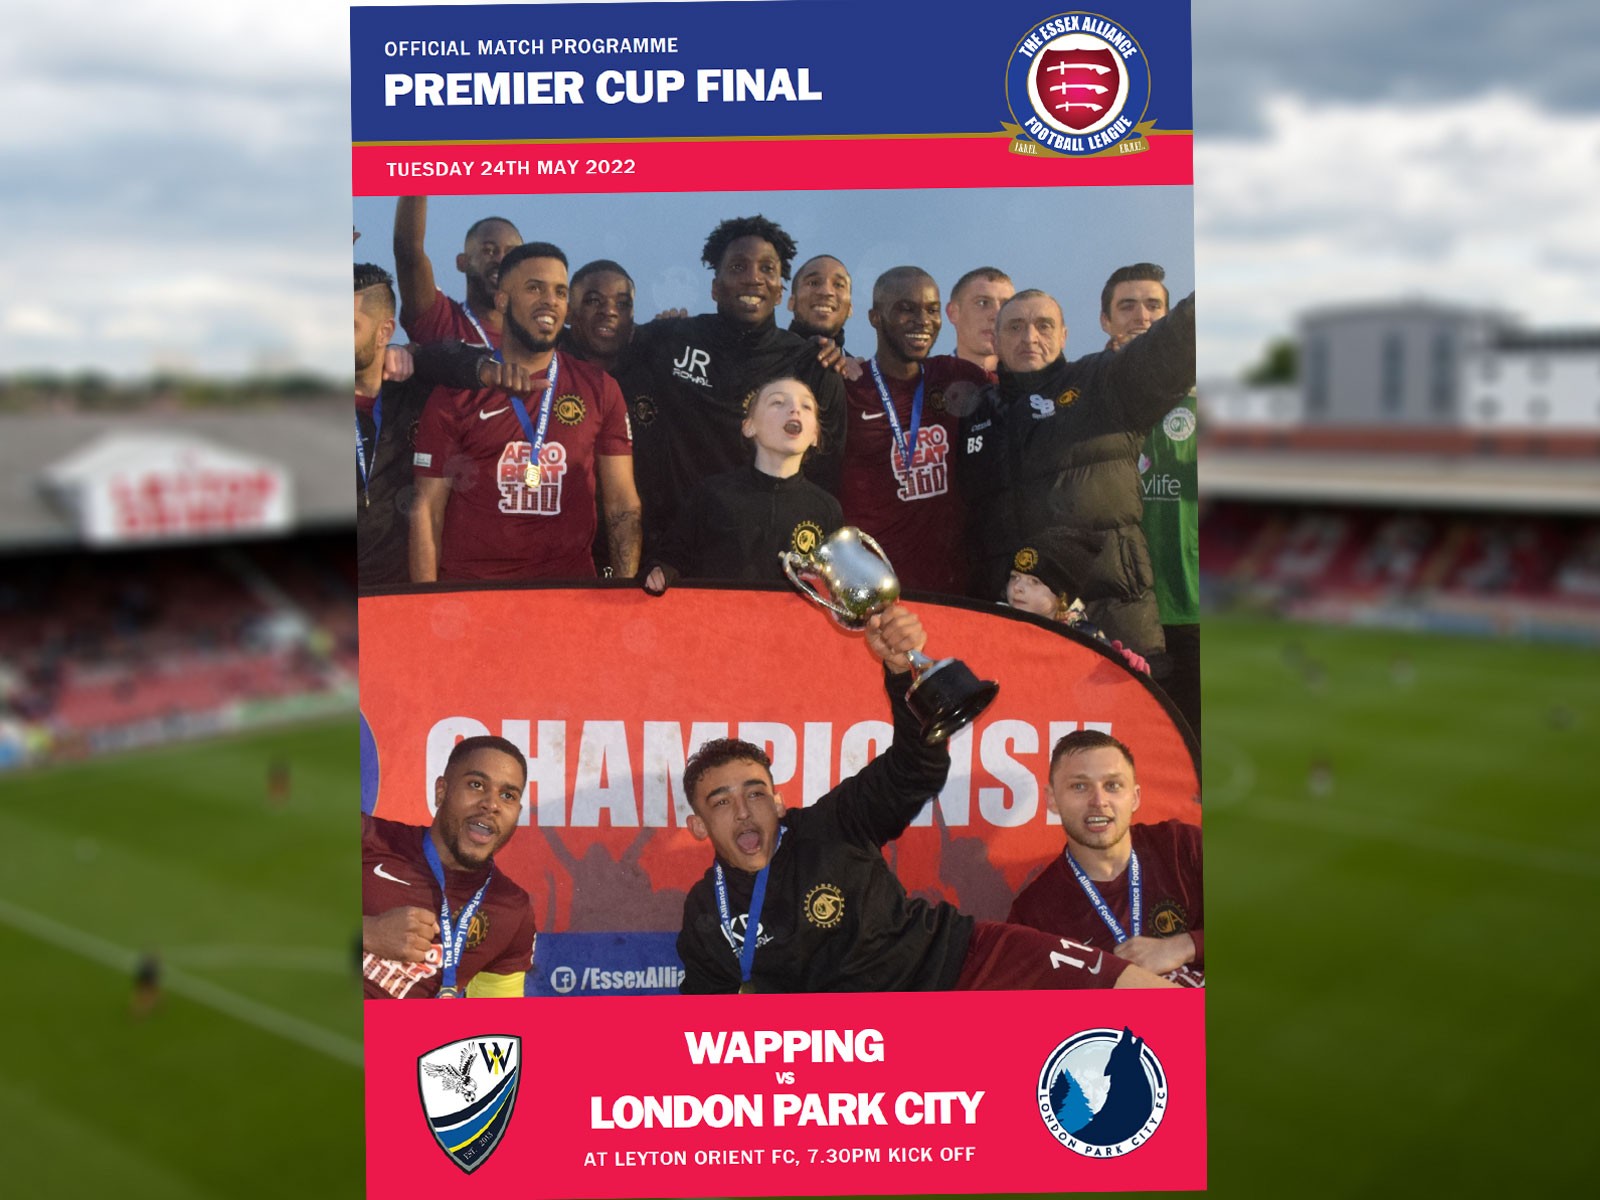 Wapping face London Park City in Premier Division Cup showdown